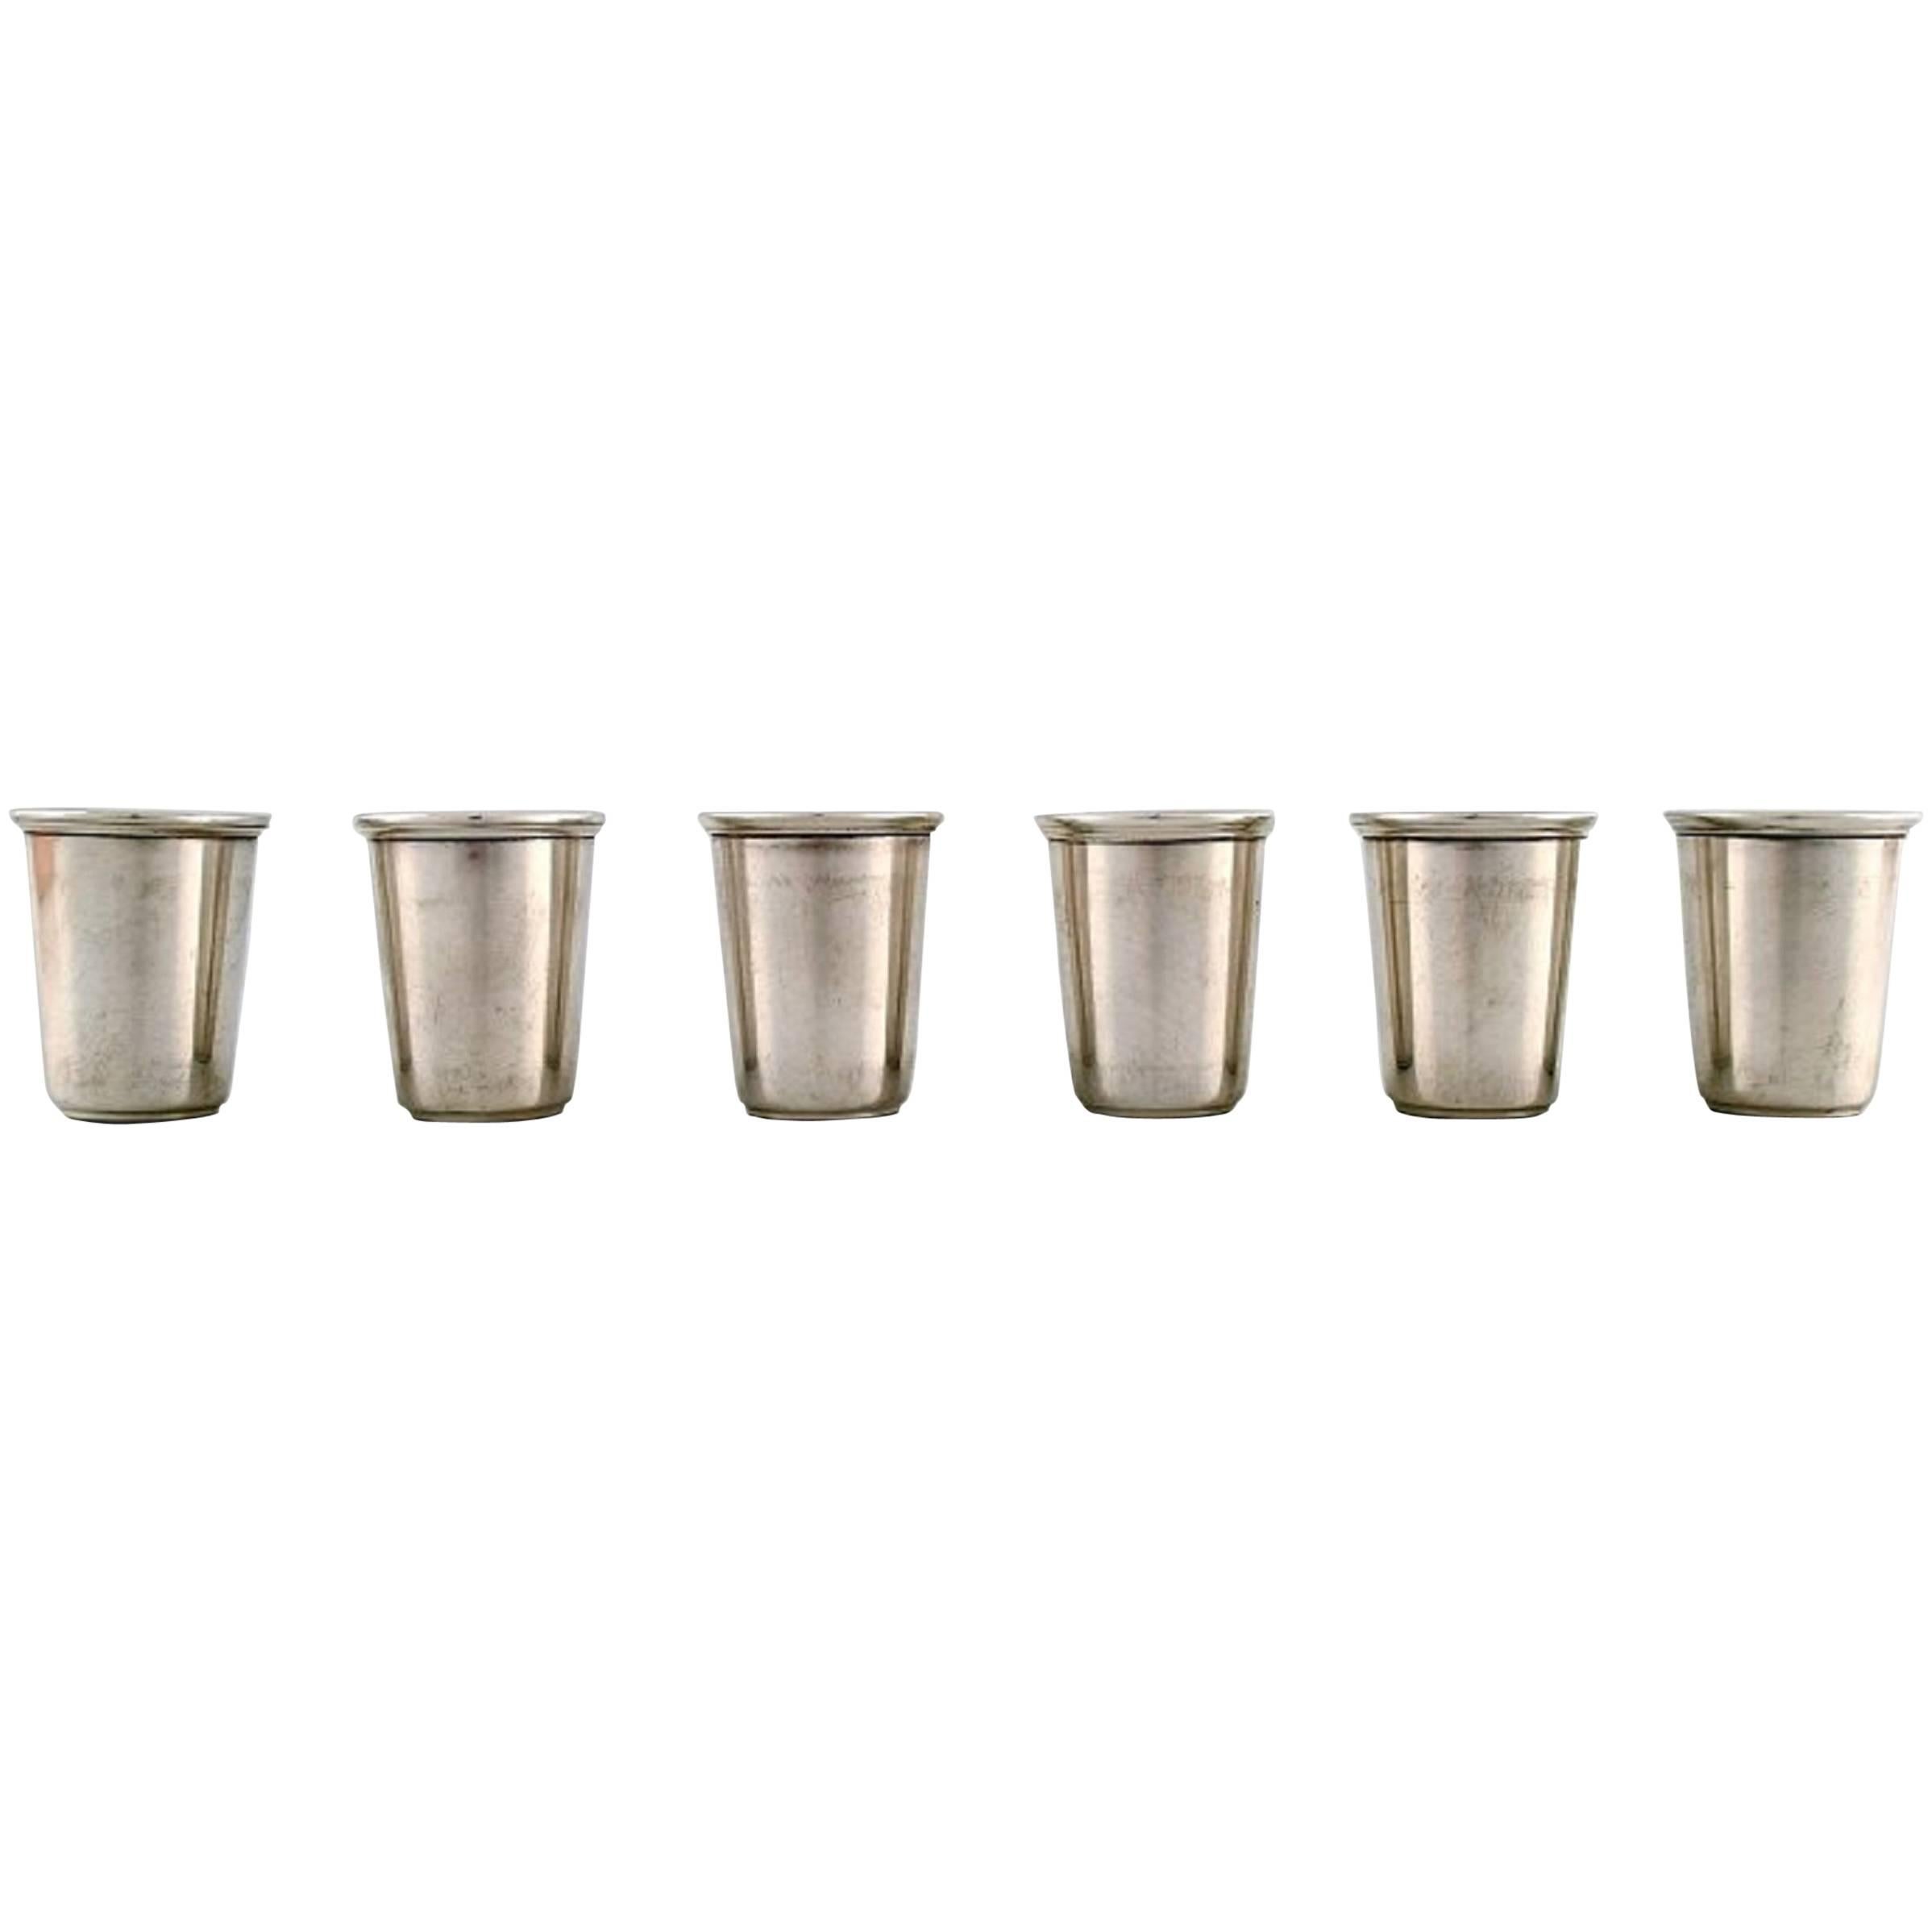 Six Vodka / Snaps / Hunting Goblets in Sterling Silver, circa 1930s-1940s